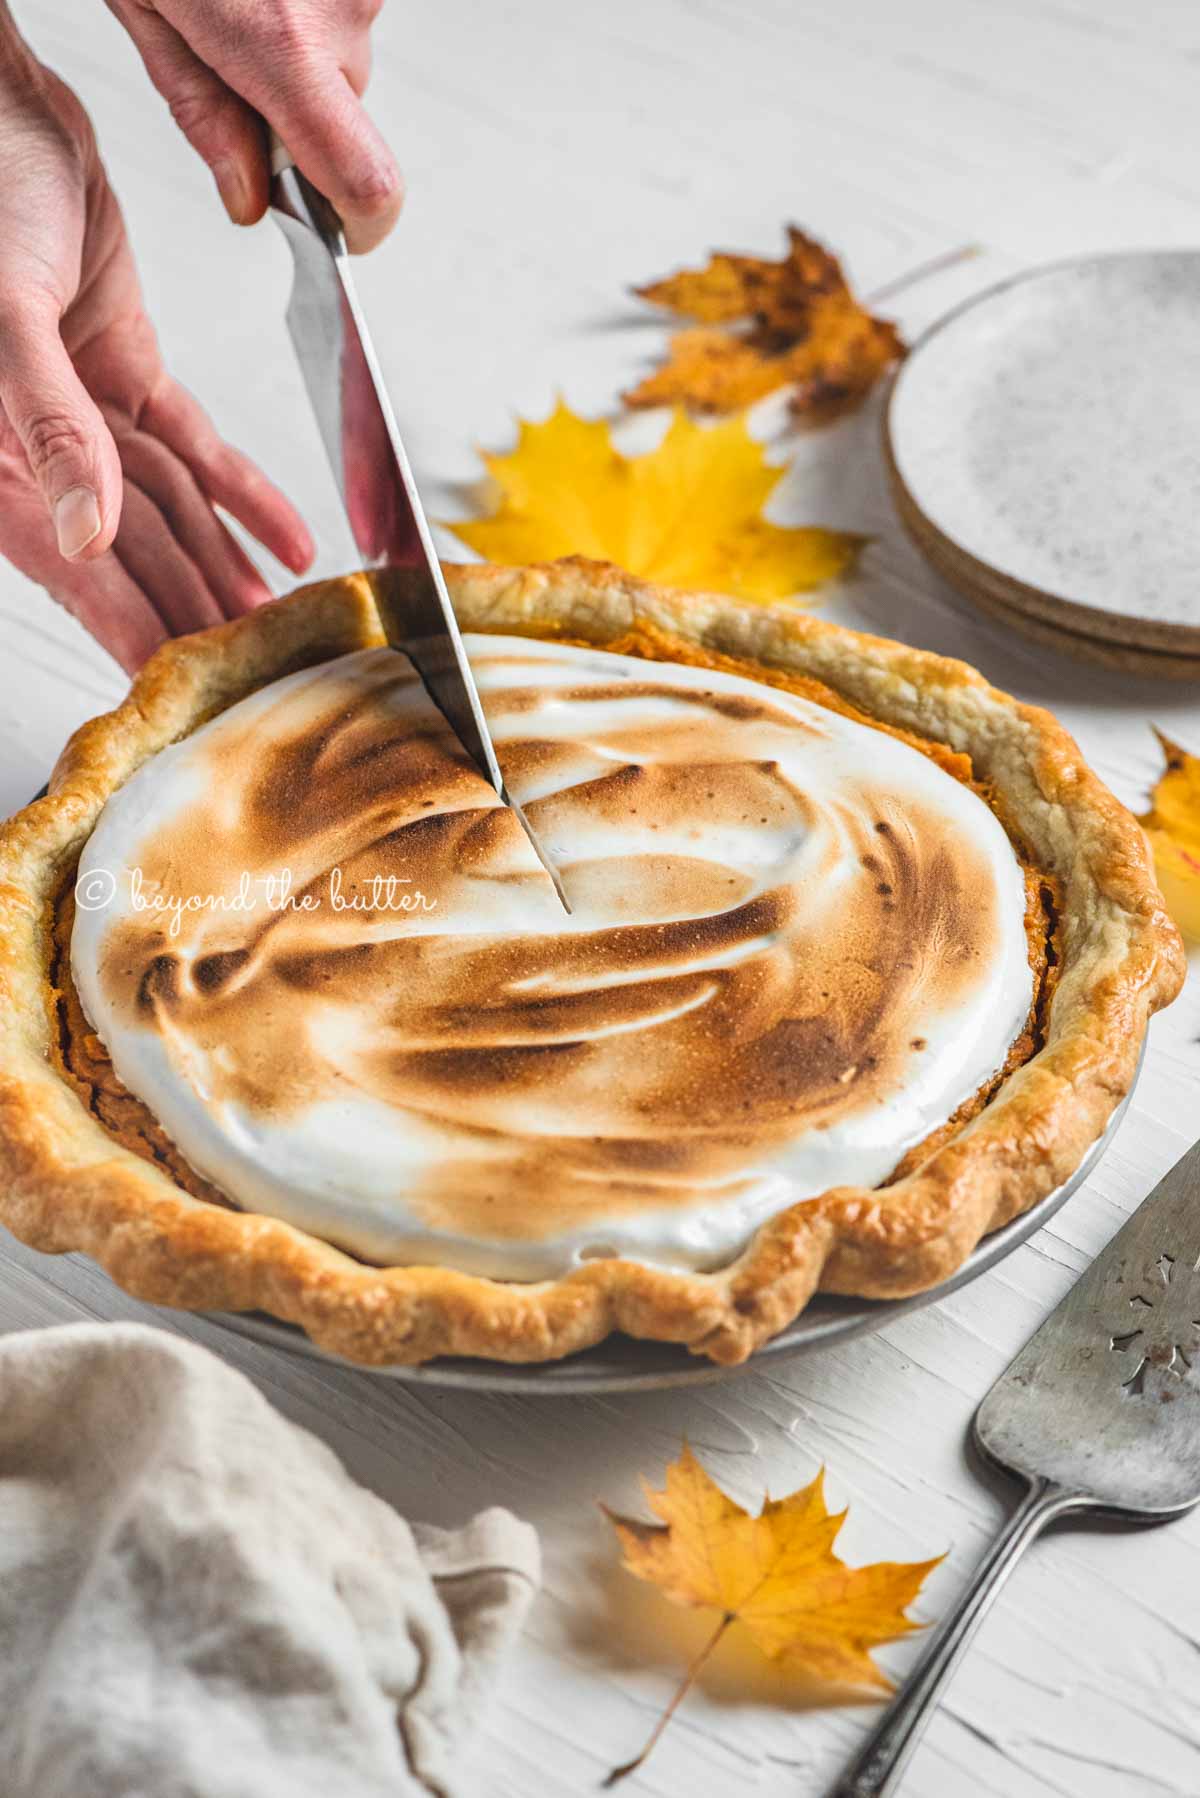 Cutting into the brown sugar sweet potato pie with pie server, plates, and napkin around it | | All Images © Beyond the Butter®